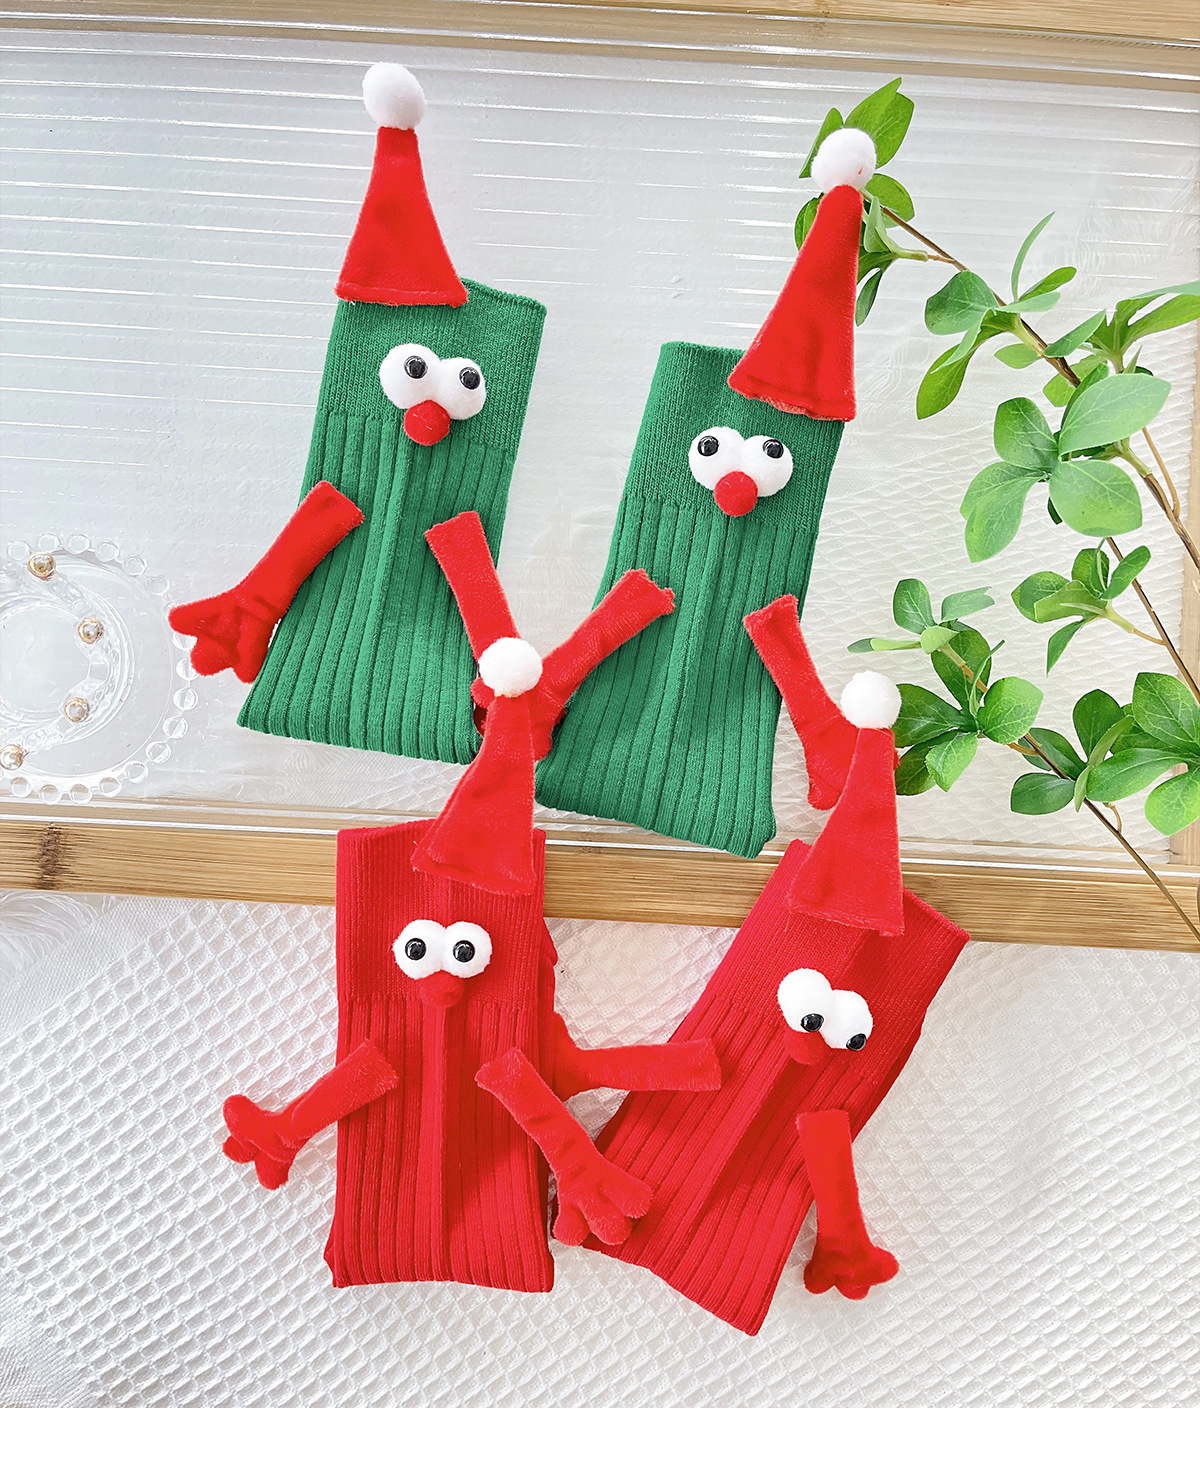 3pairs Christmas Themed Magnetic Sock Clips For Women, Suitable For  Halloween And Christmas